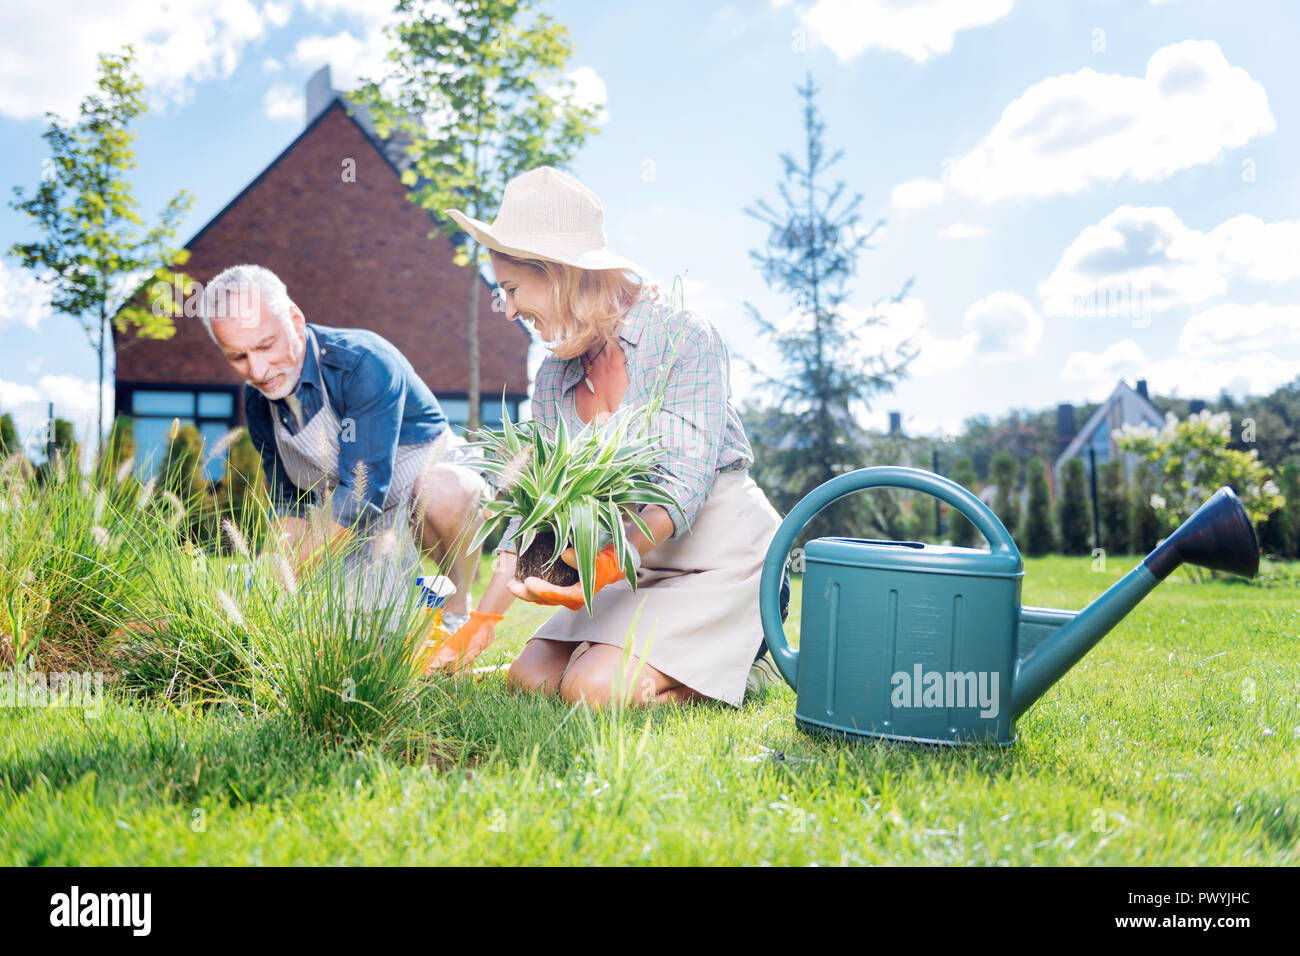 Happy beaming couple sitting hear garden sprinkler while planting flowers Stock Photo